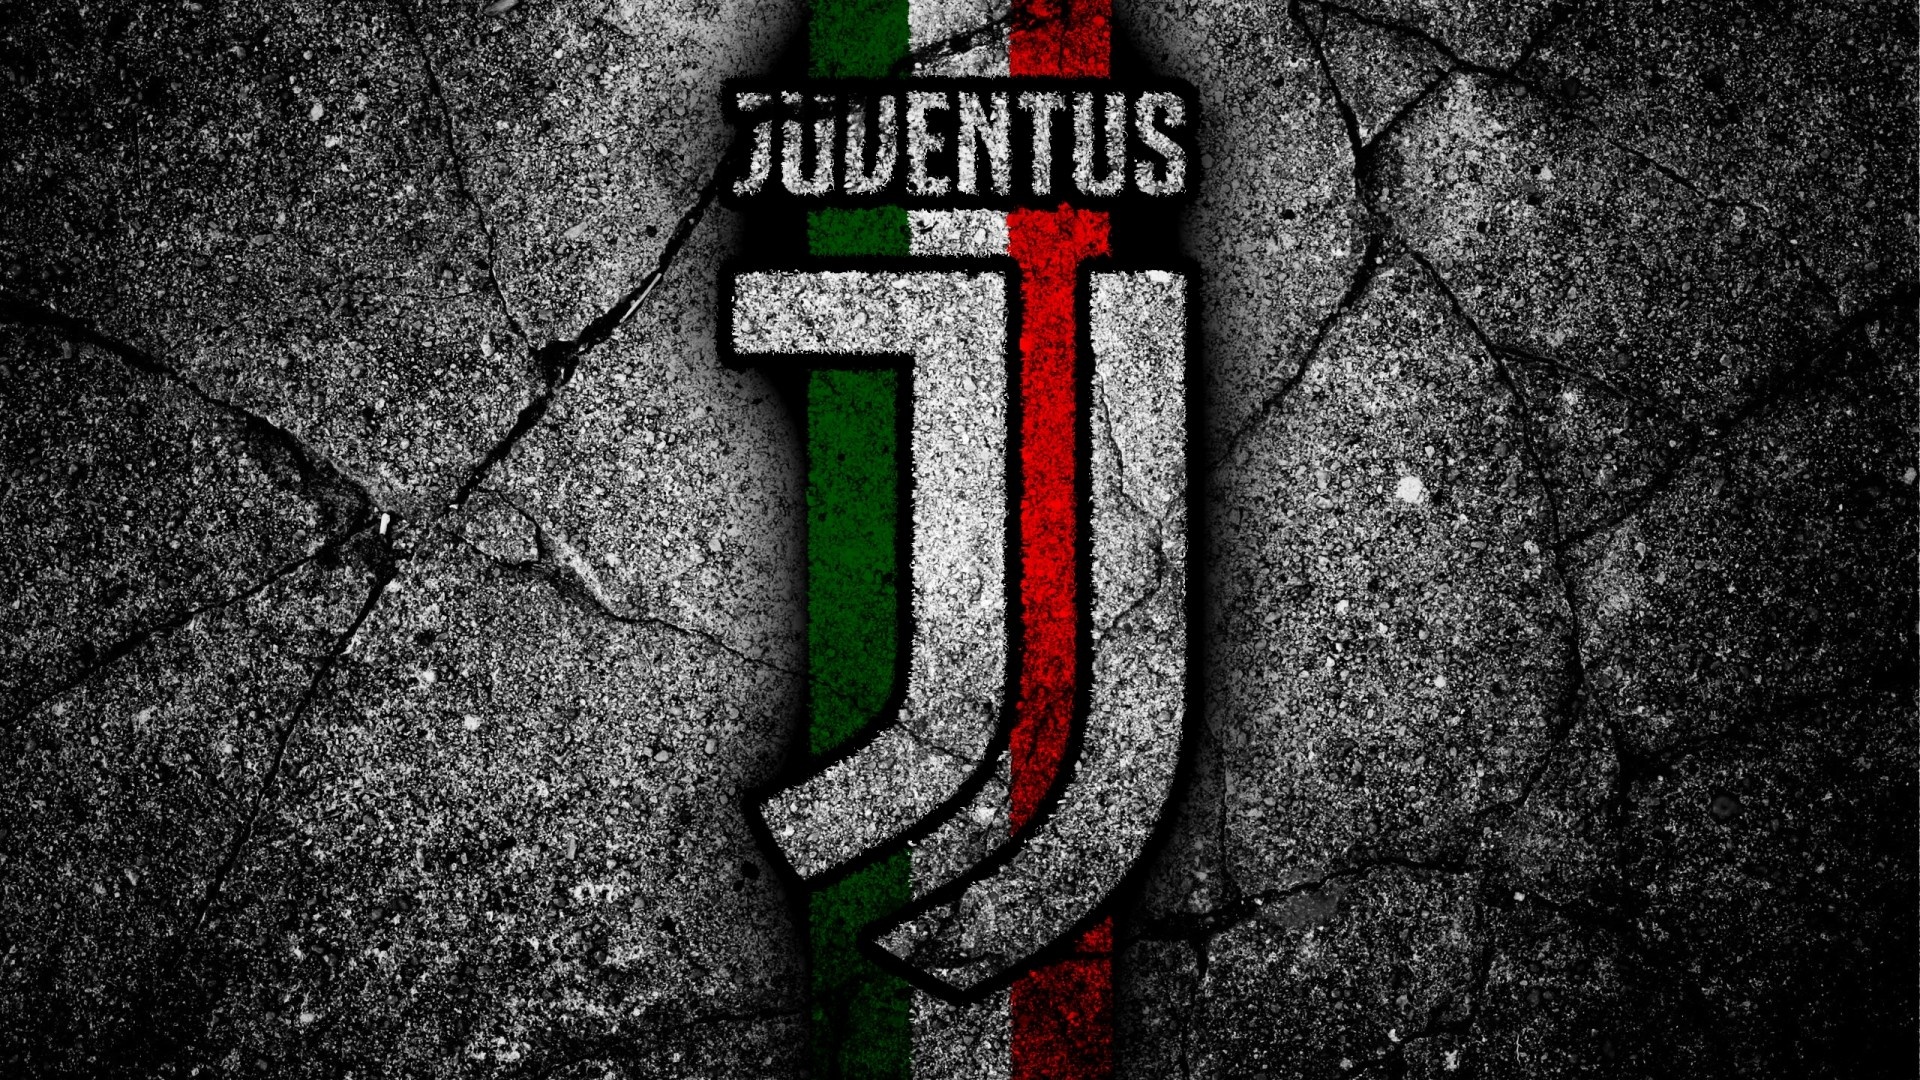 Juventus: The most successful team in the history of Italian football. 1920x1080 Full HD Wallpaper.